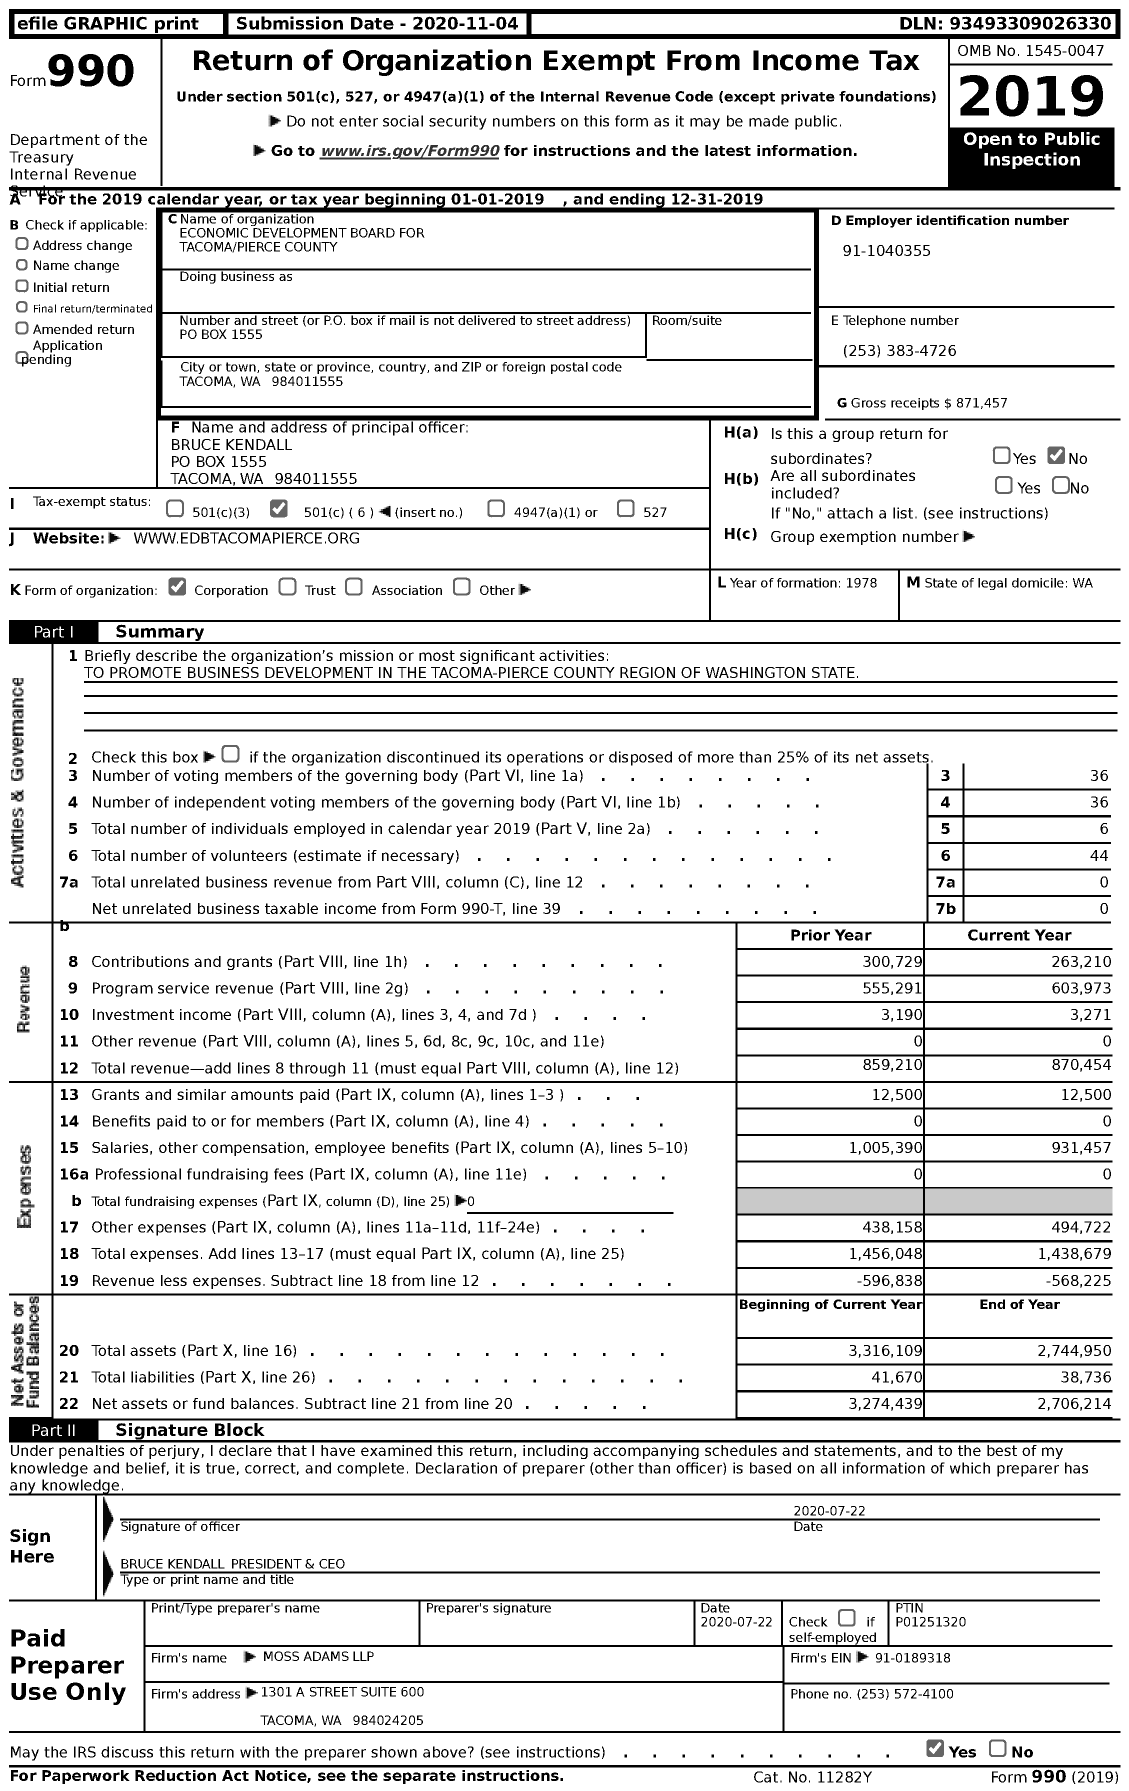 Image of first page of 2019 Form 990 for Economic Development Board for Tacoma Pierce County (EDB)